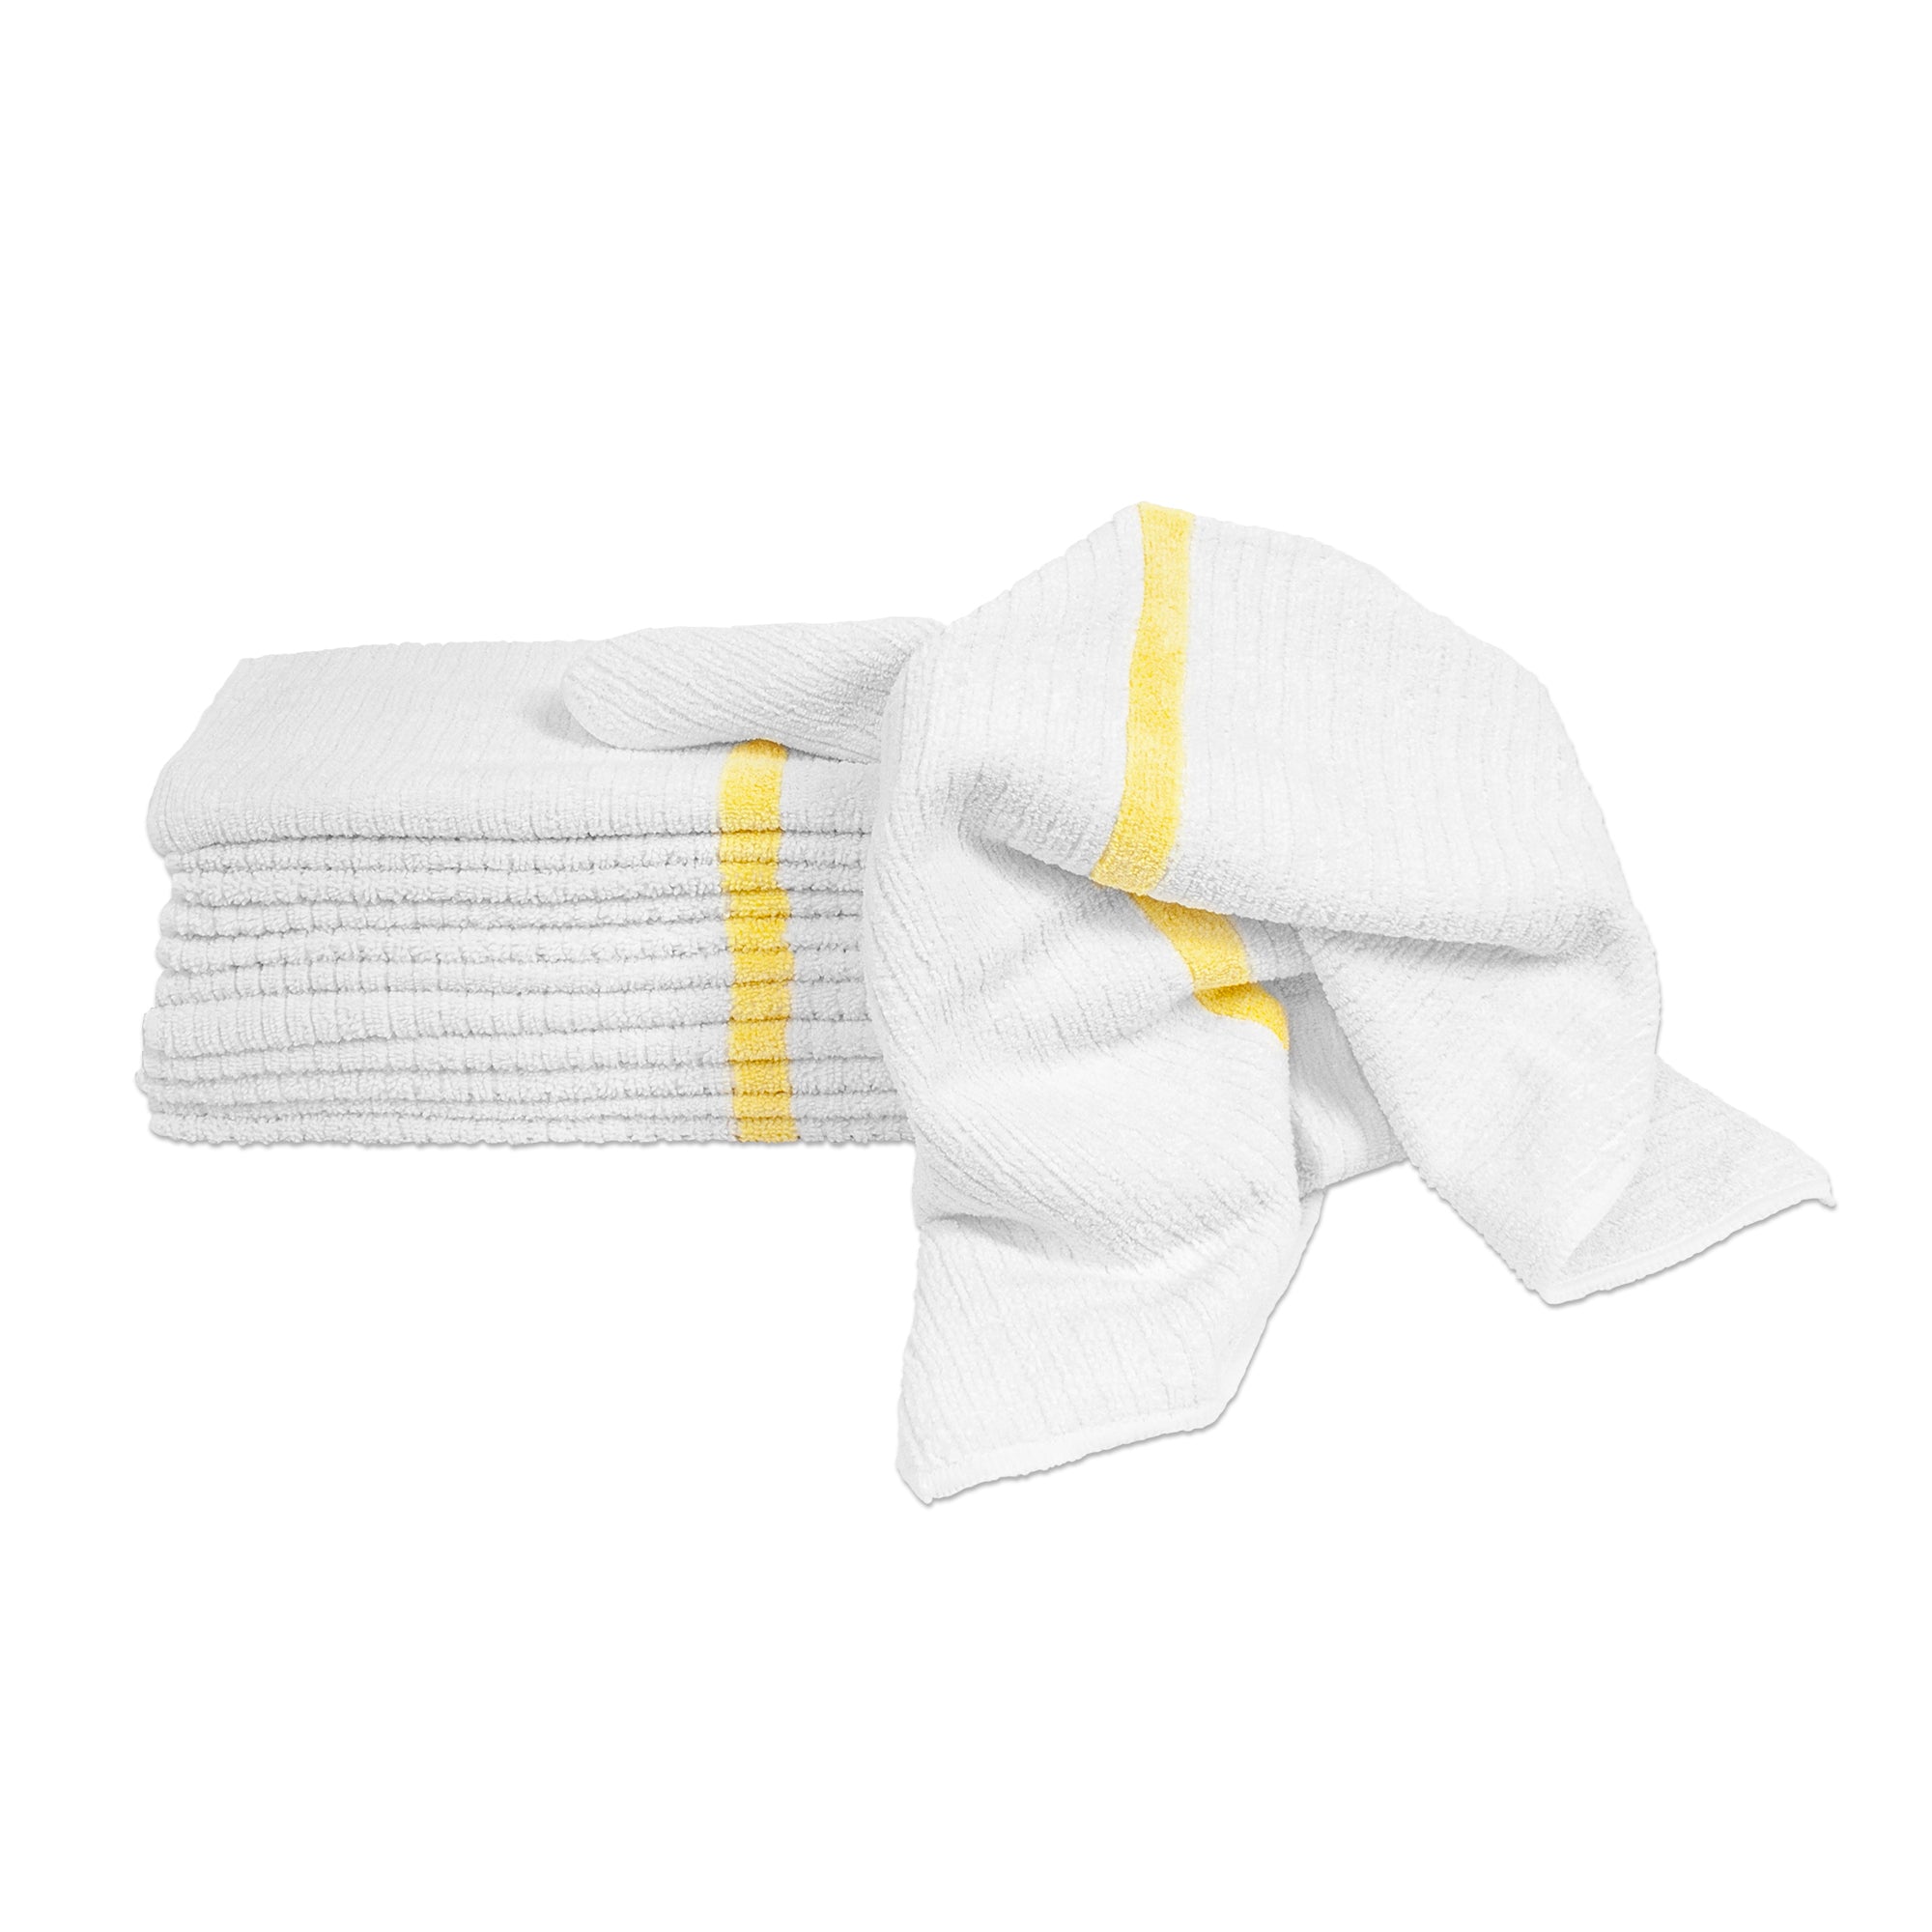 Nouvelle Legende Ribbed 100% Cotton Bar Towel, White, 16 in x 19